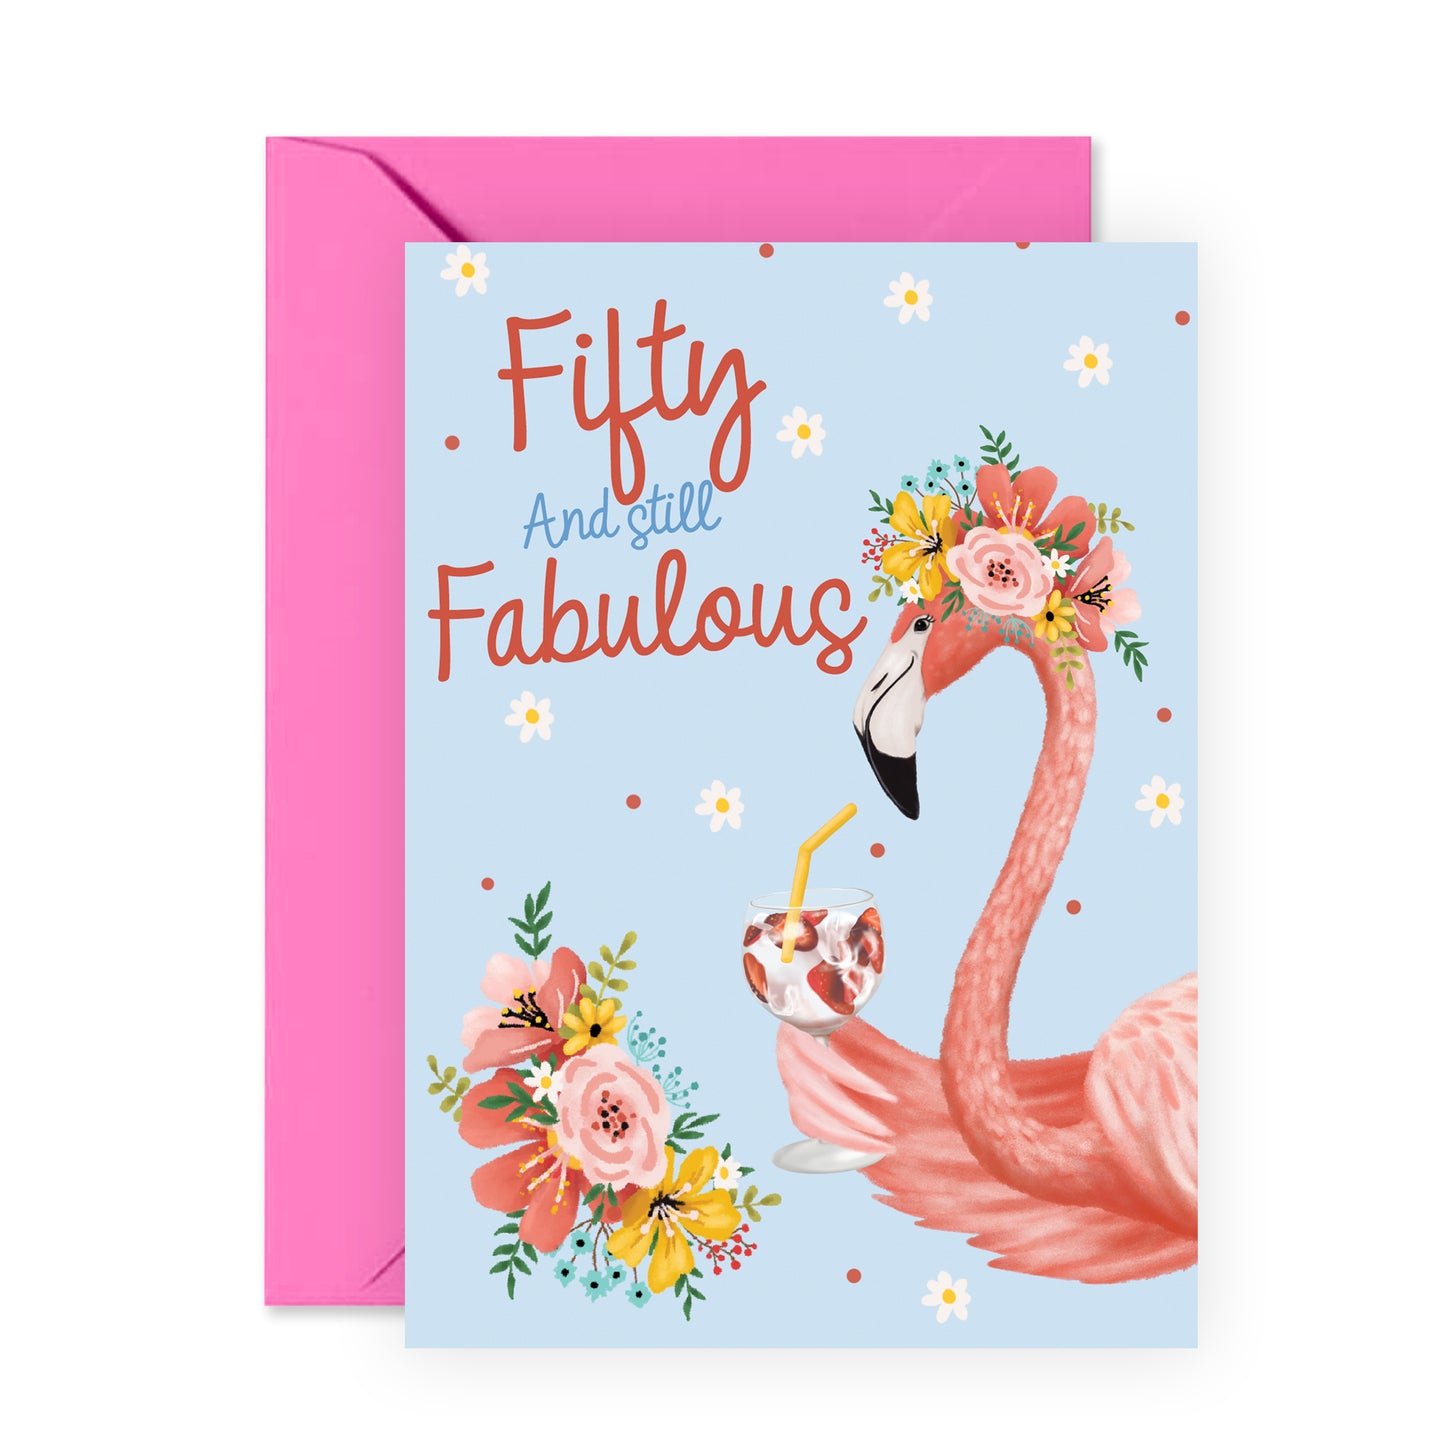 50th Birthday Card - Fifty And Still Fabulous - For Women